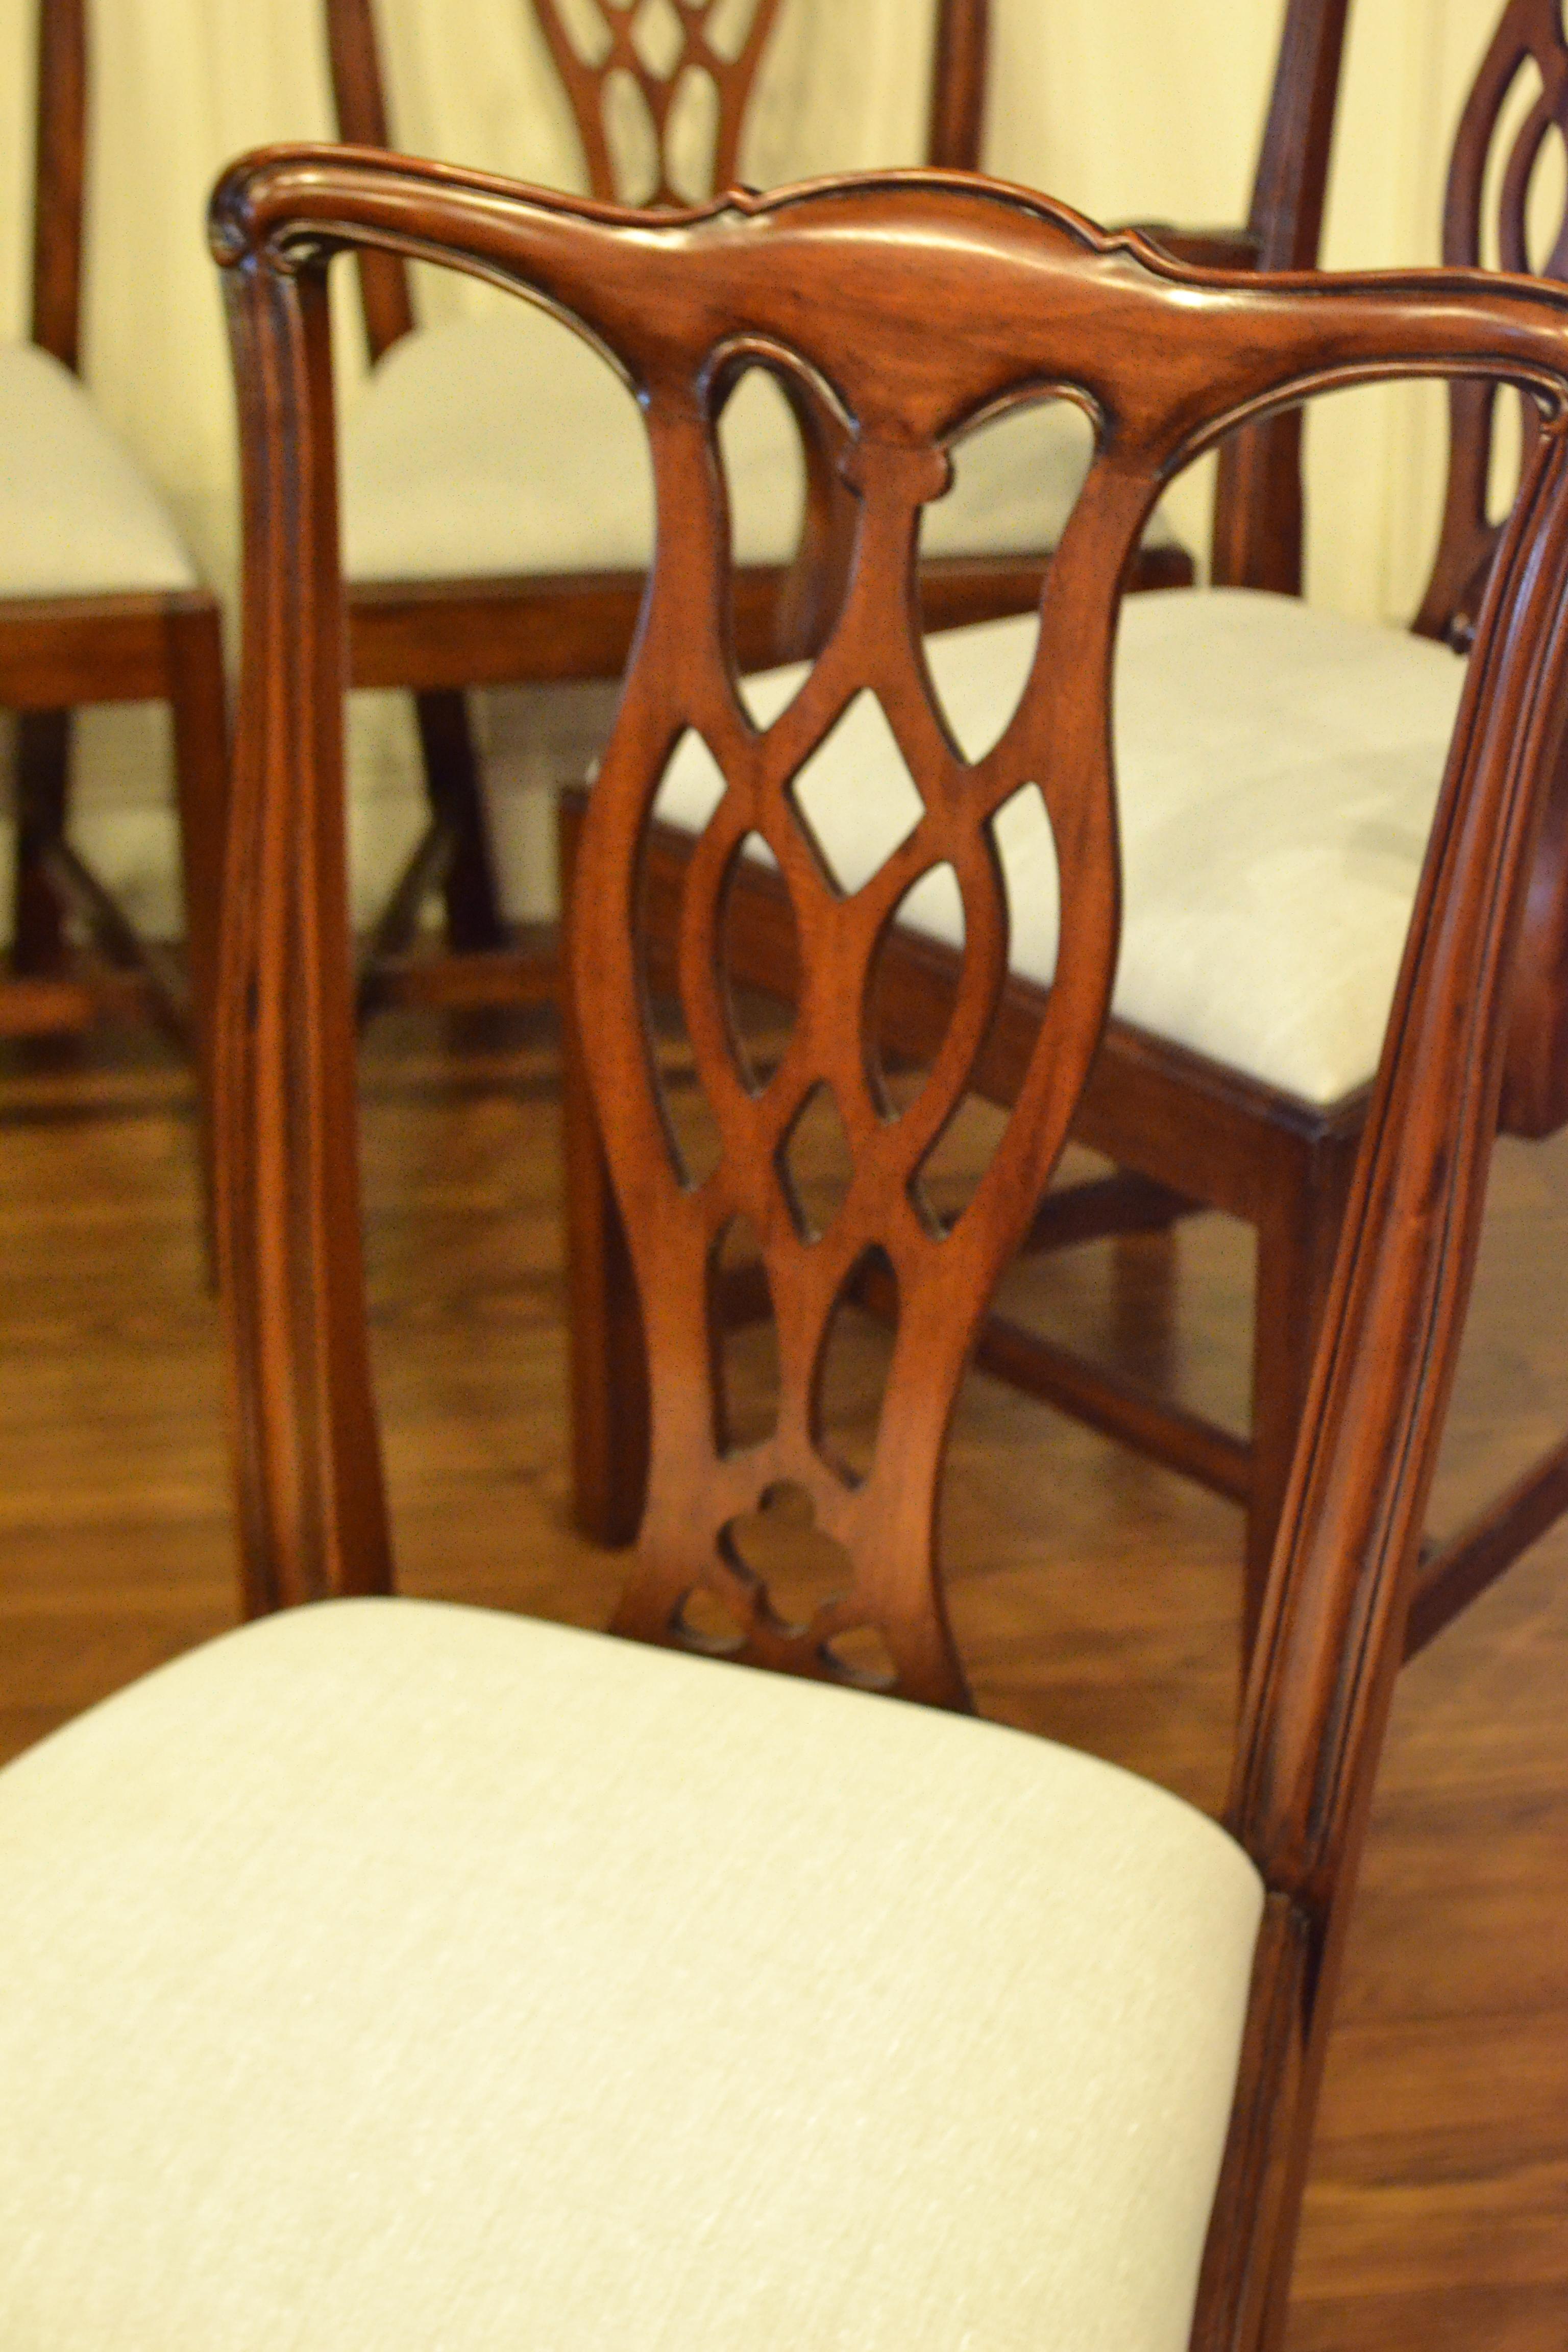 These are new traditional mahogany dining chairs. Their design was inspired by the early English Chippendale style straight leg dining chairs from the Georgian period. They feature classic early Chippendale styling with less carvings than the later